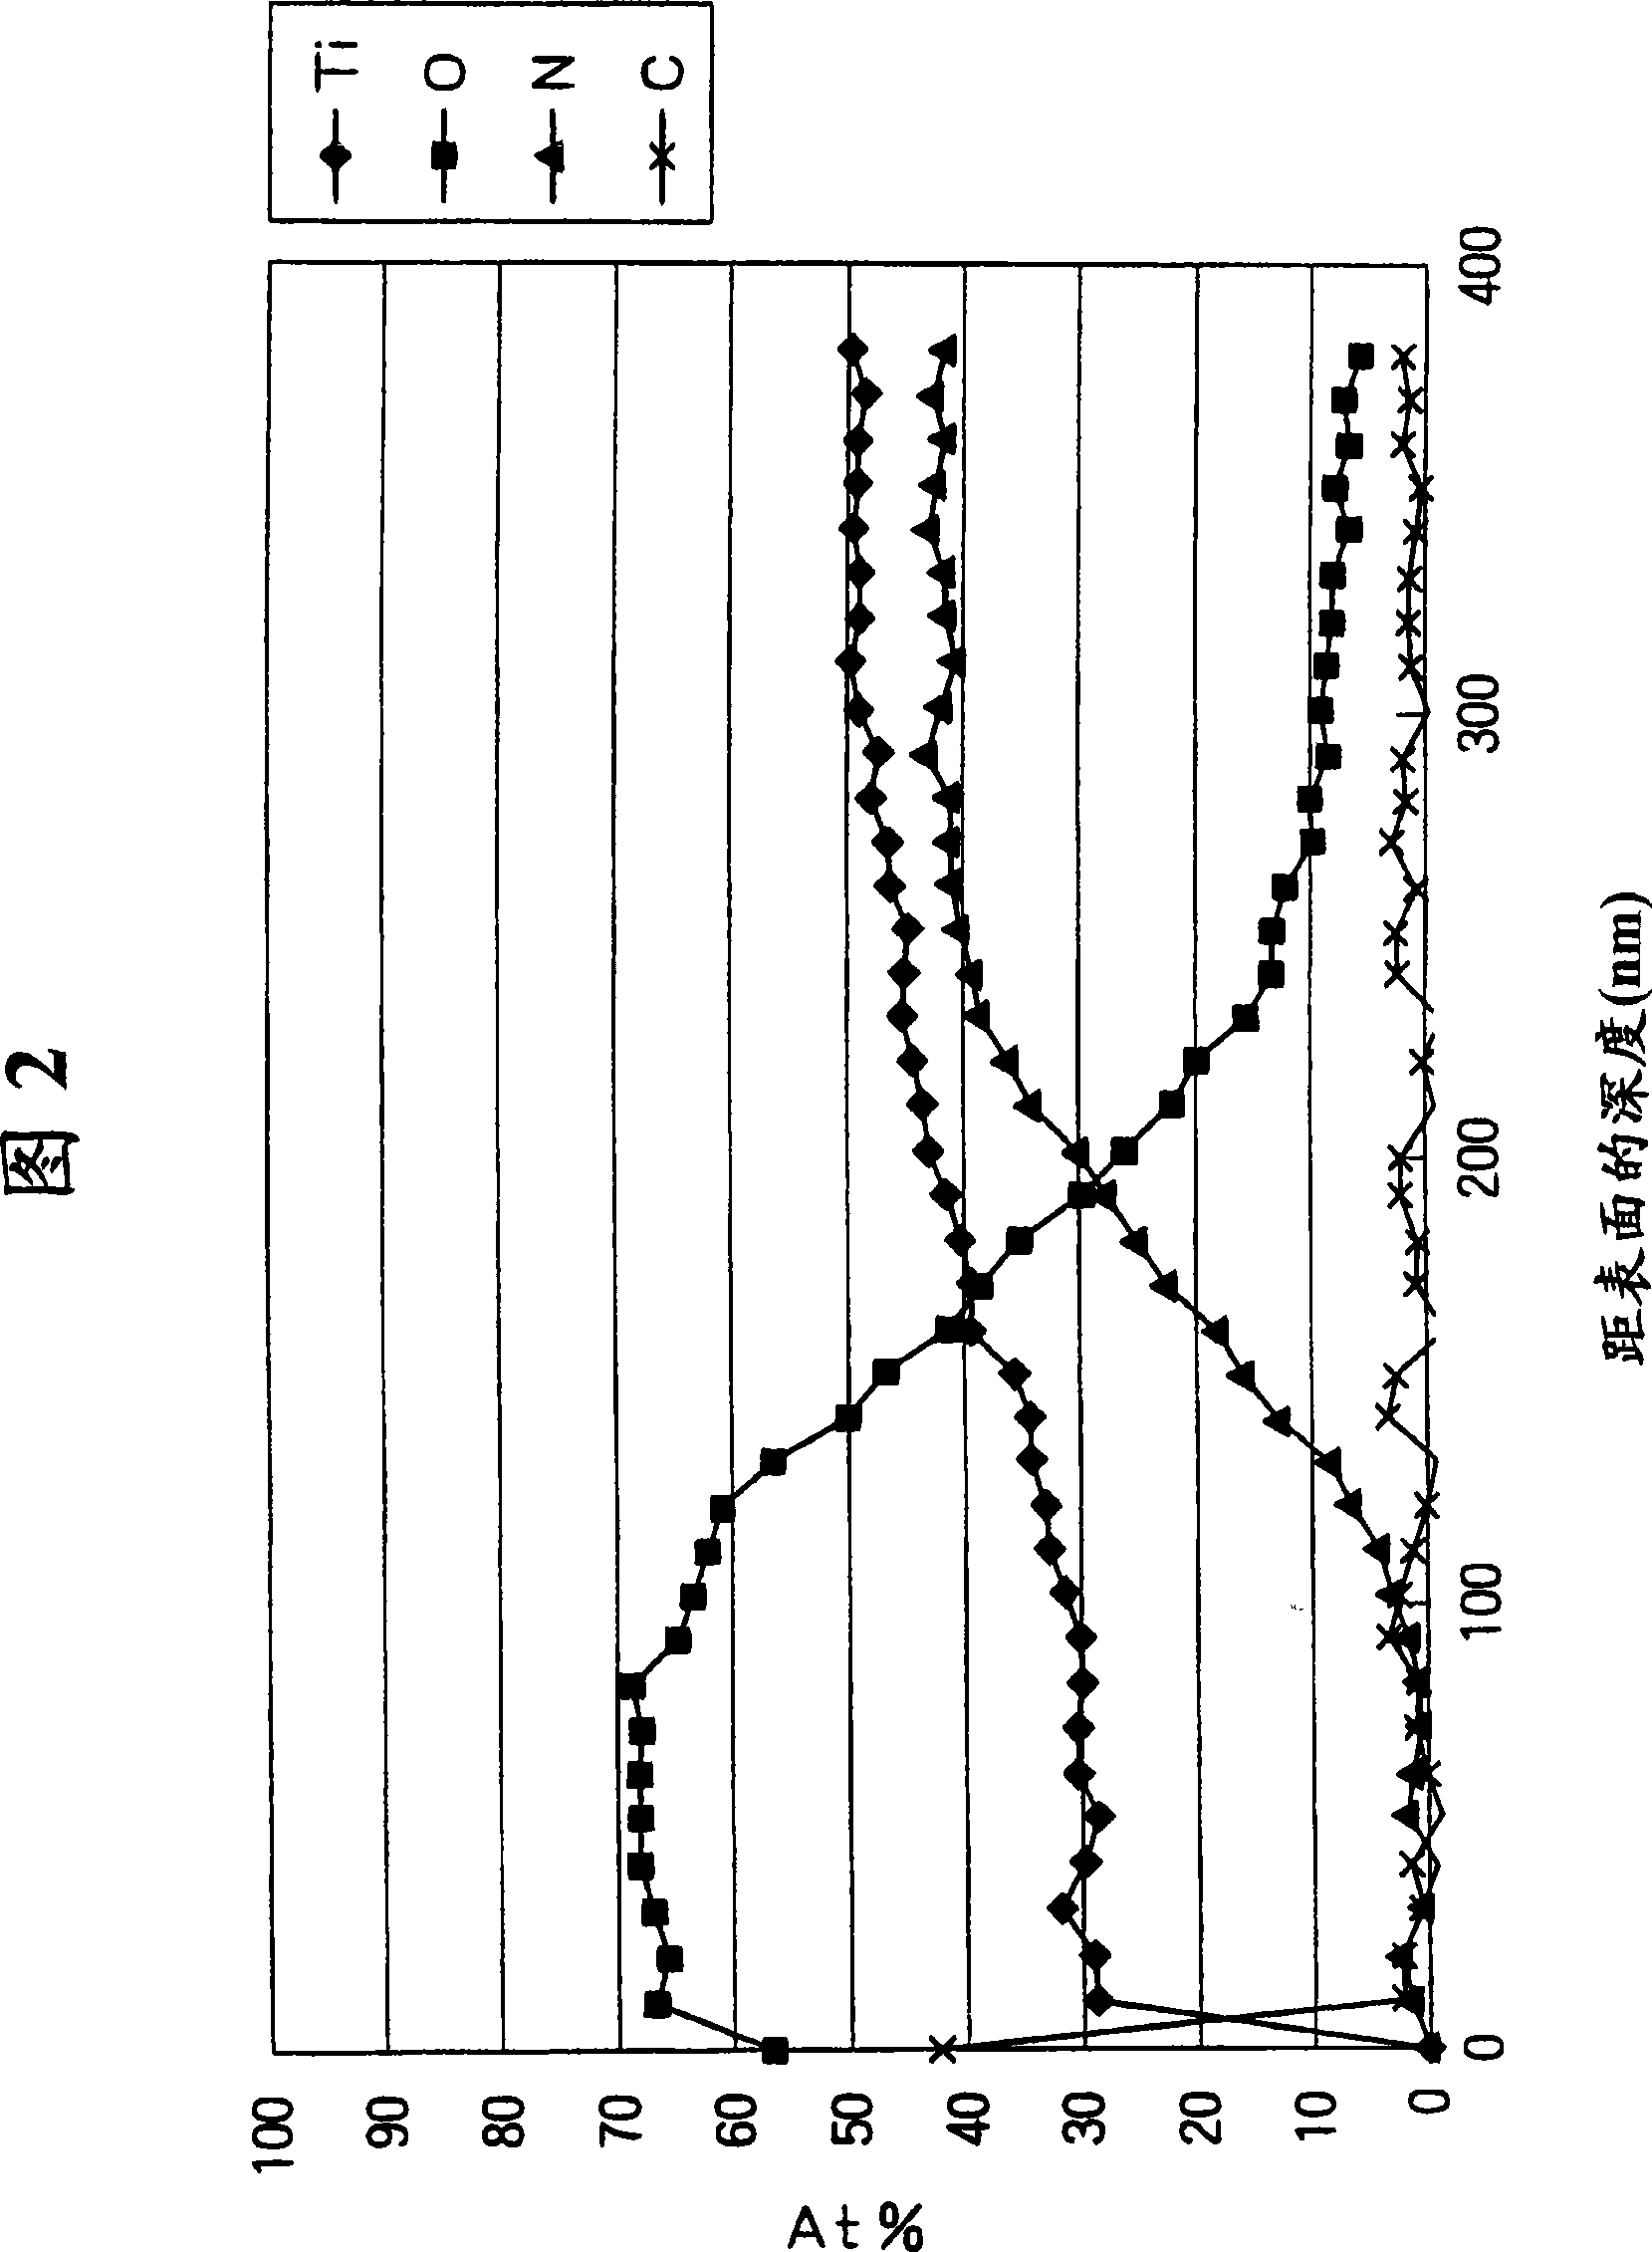 Alumina coating correlation technique with alpha type crystal structure